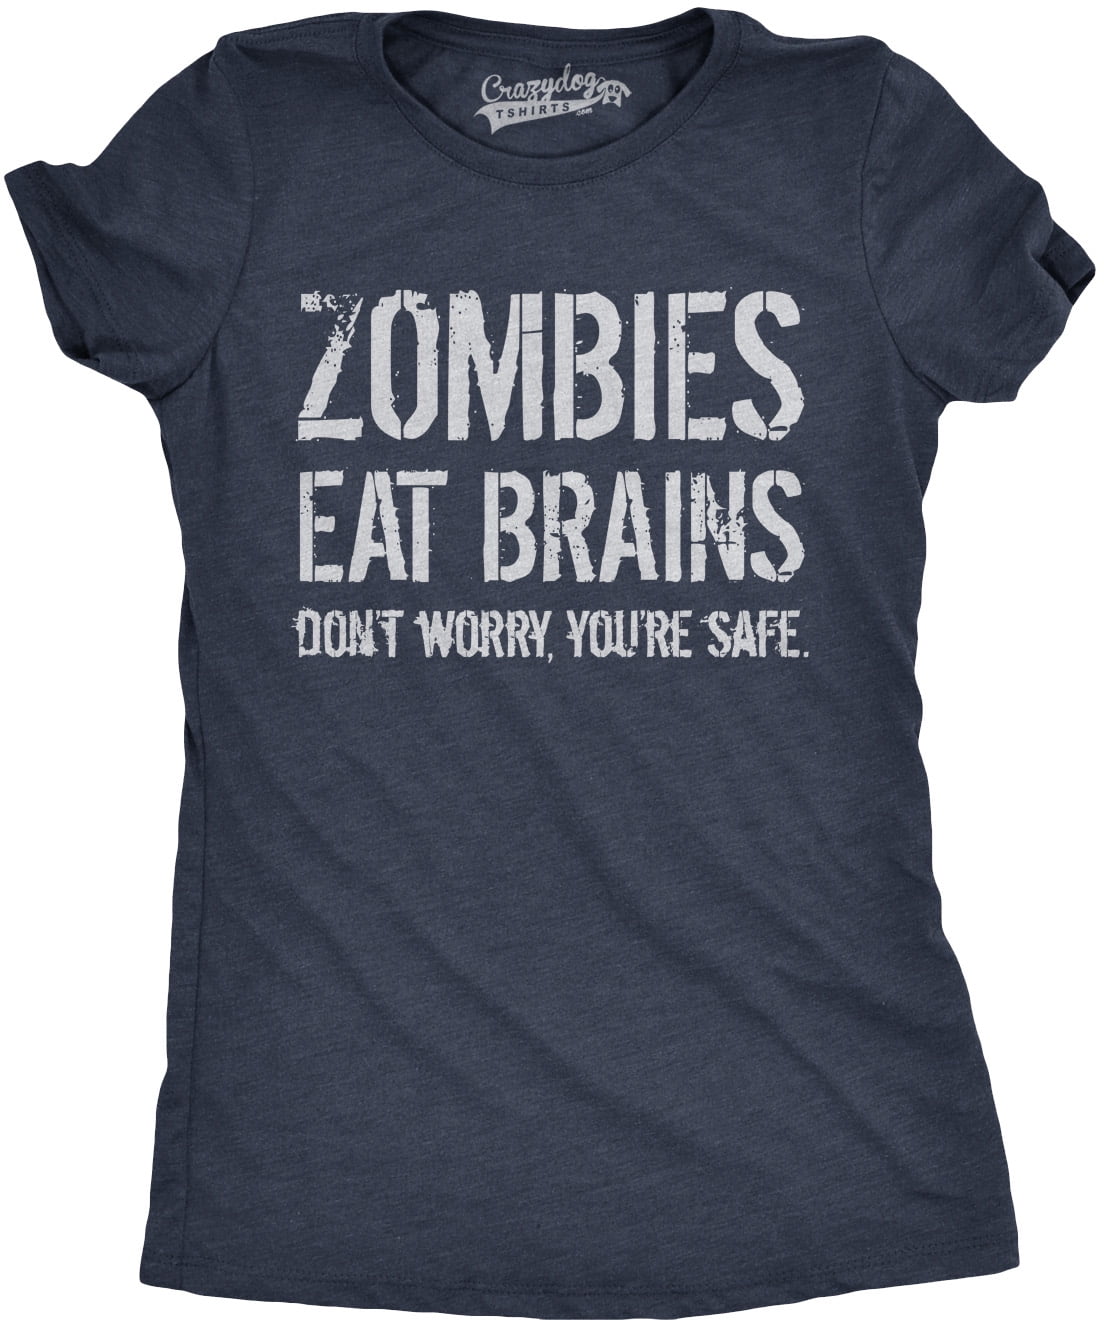 Eat your brains. The Zombies ate your Brains. Safe funny. Zombie eating own Brain.